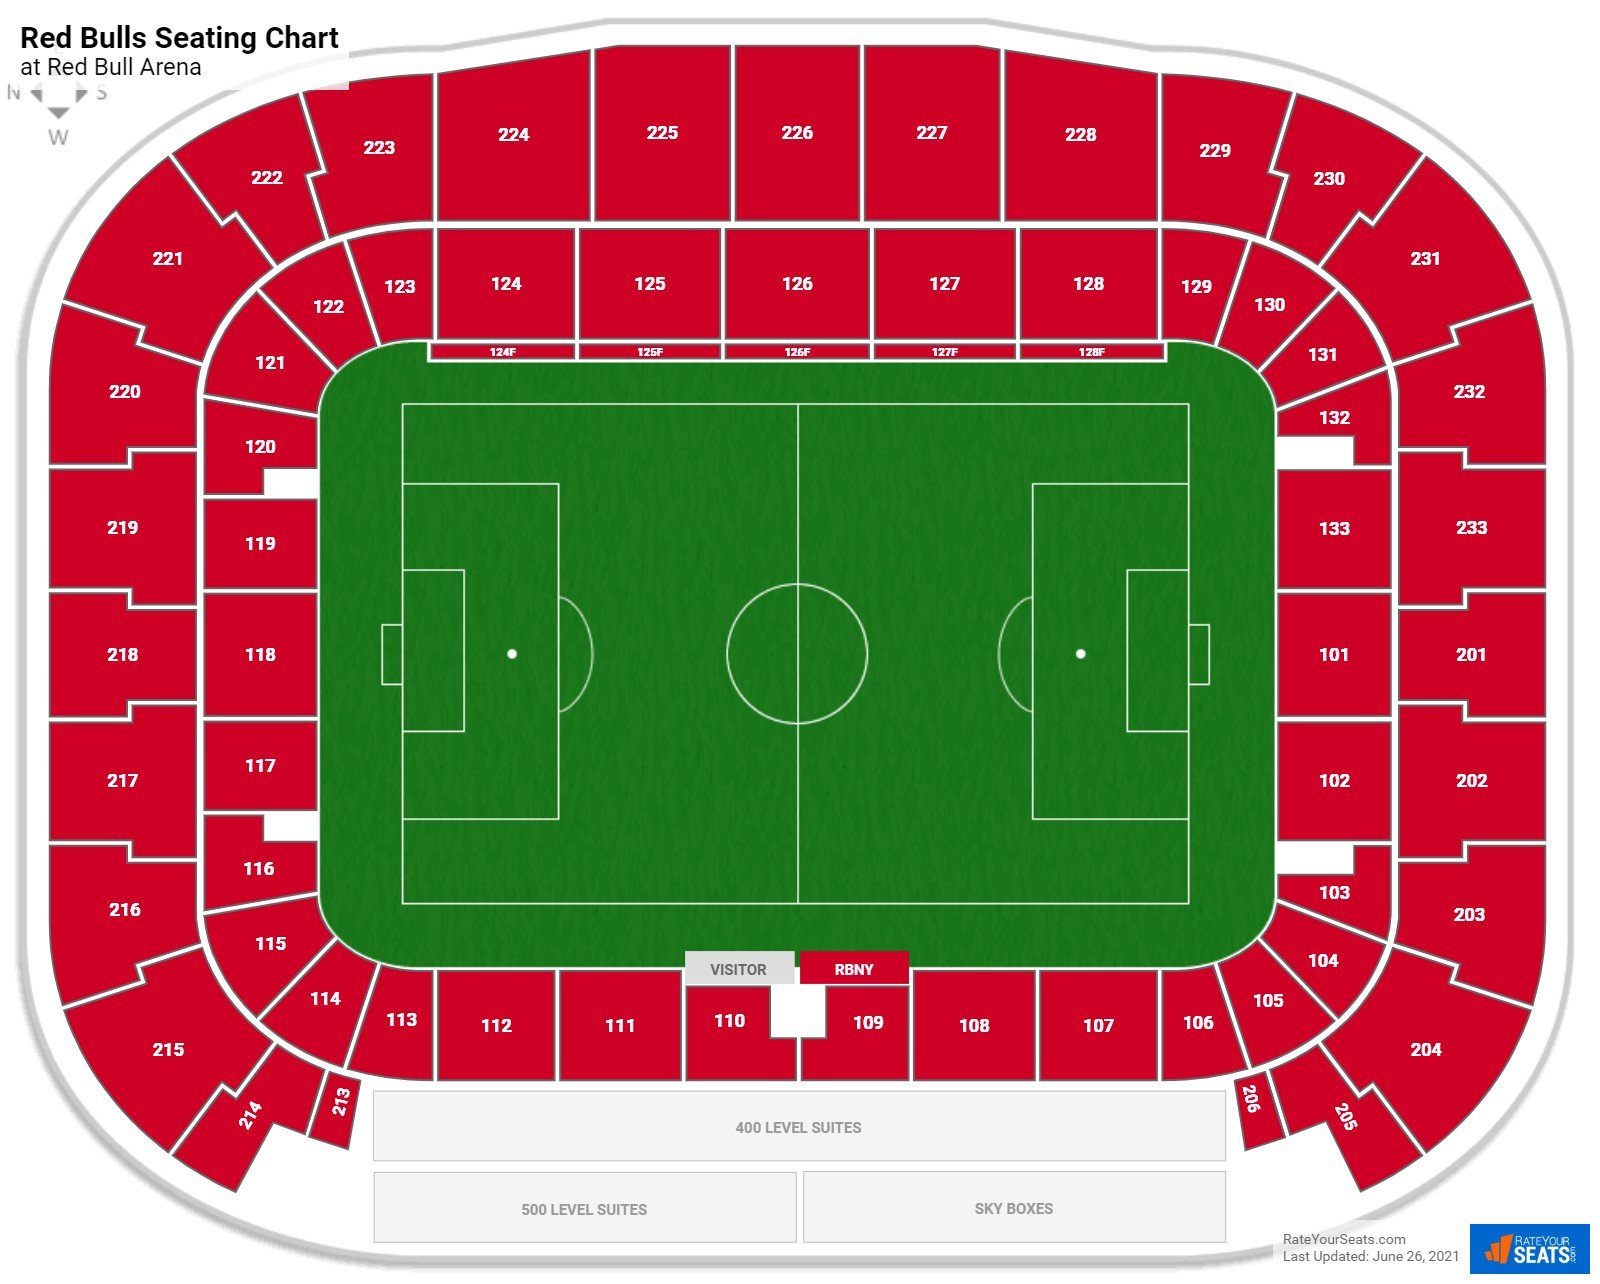 New York Red Bulls Seating Chart at Red Bull Arena